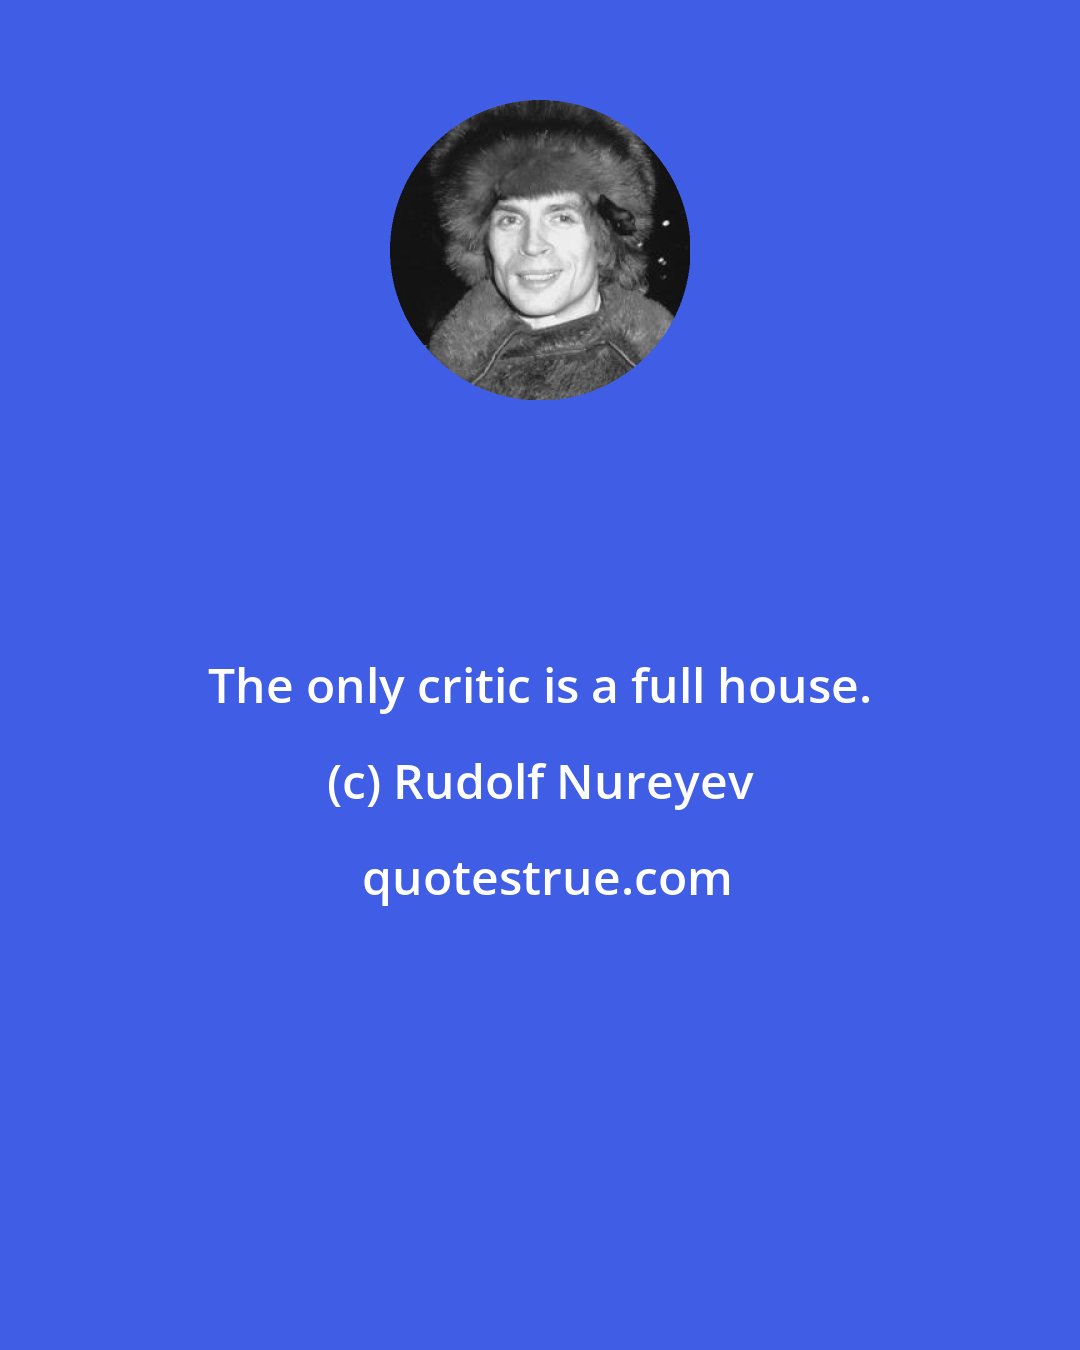 Rudolf Nureyev: The only critic is a full house.